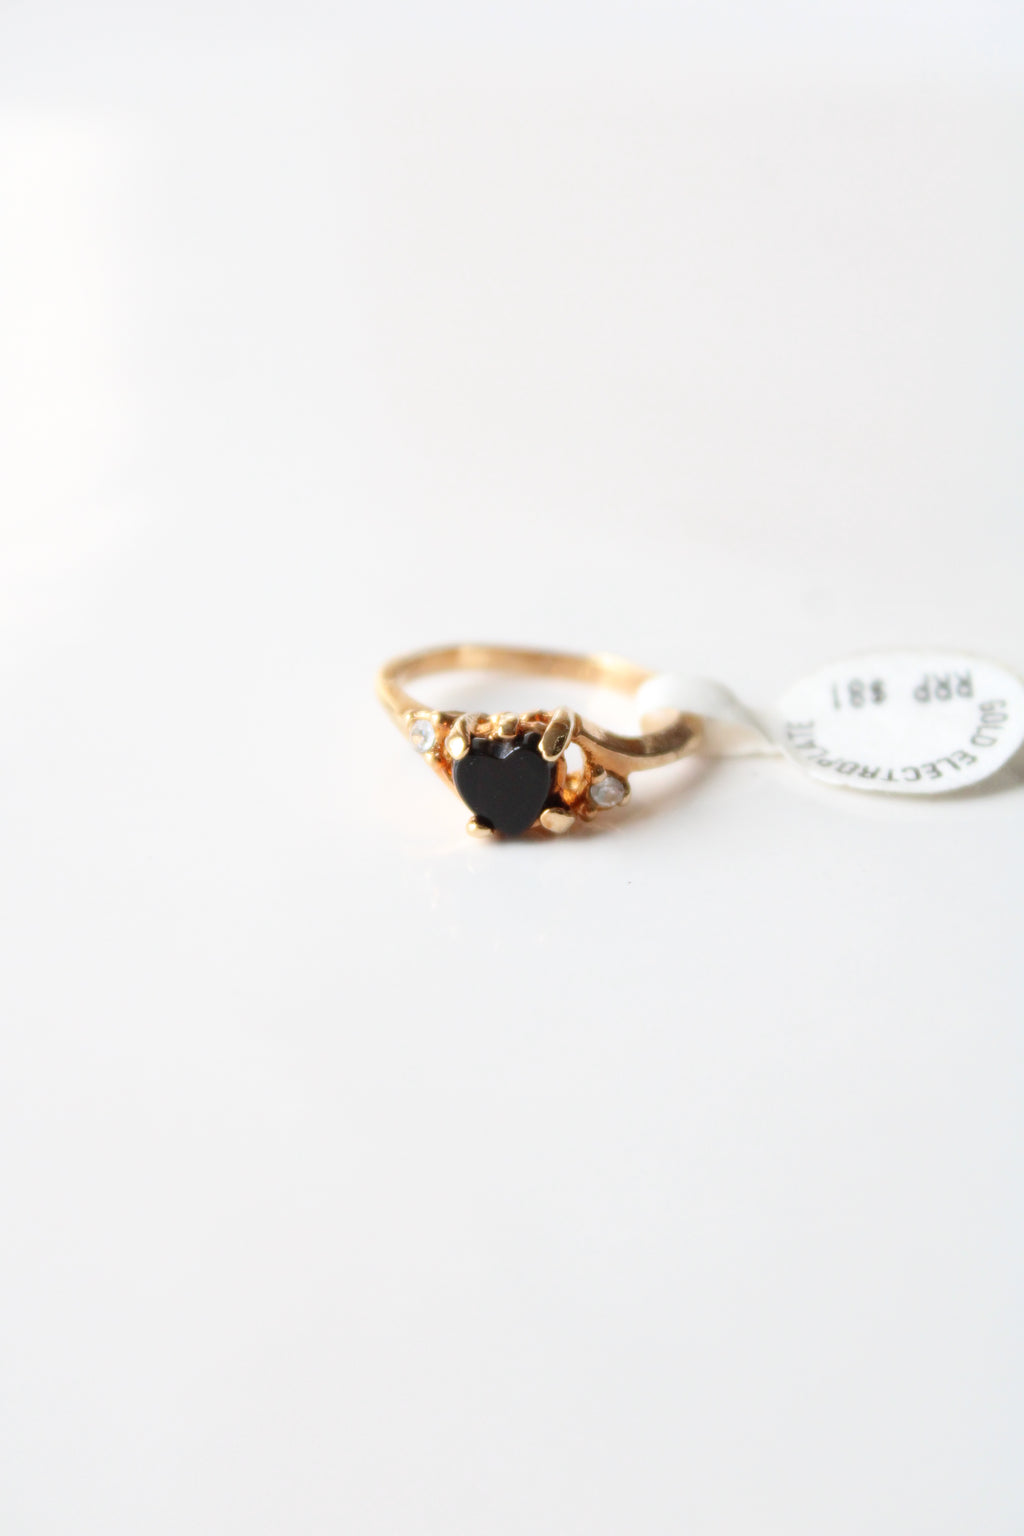 NEW Gold Electroplate Black Onyx Heart Ring | Size 6